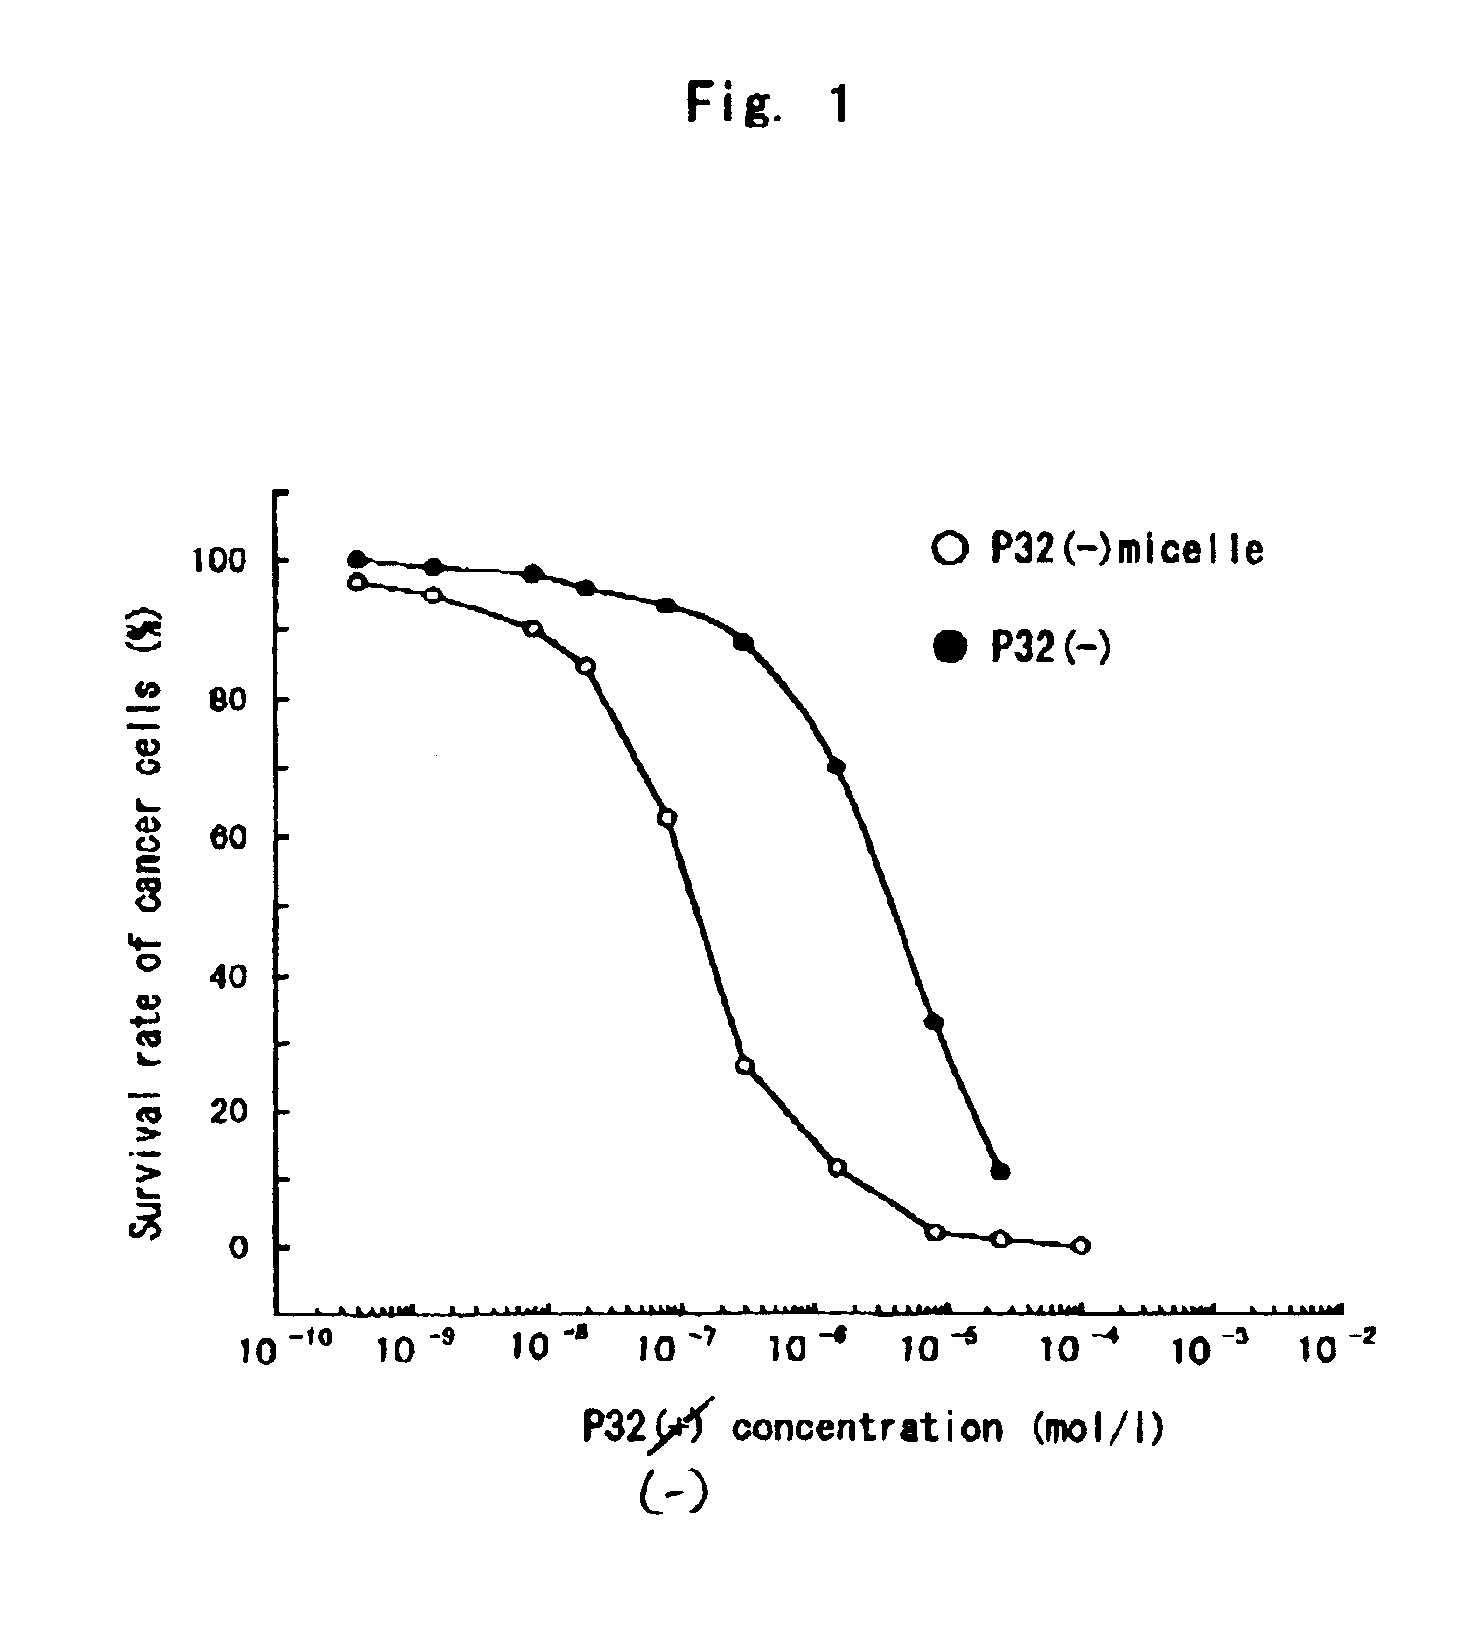 Polymeric micellar structure